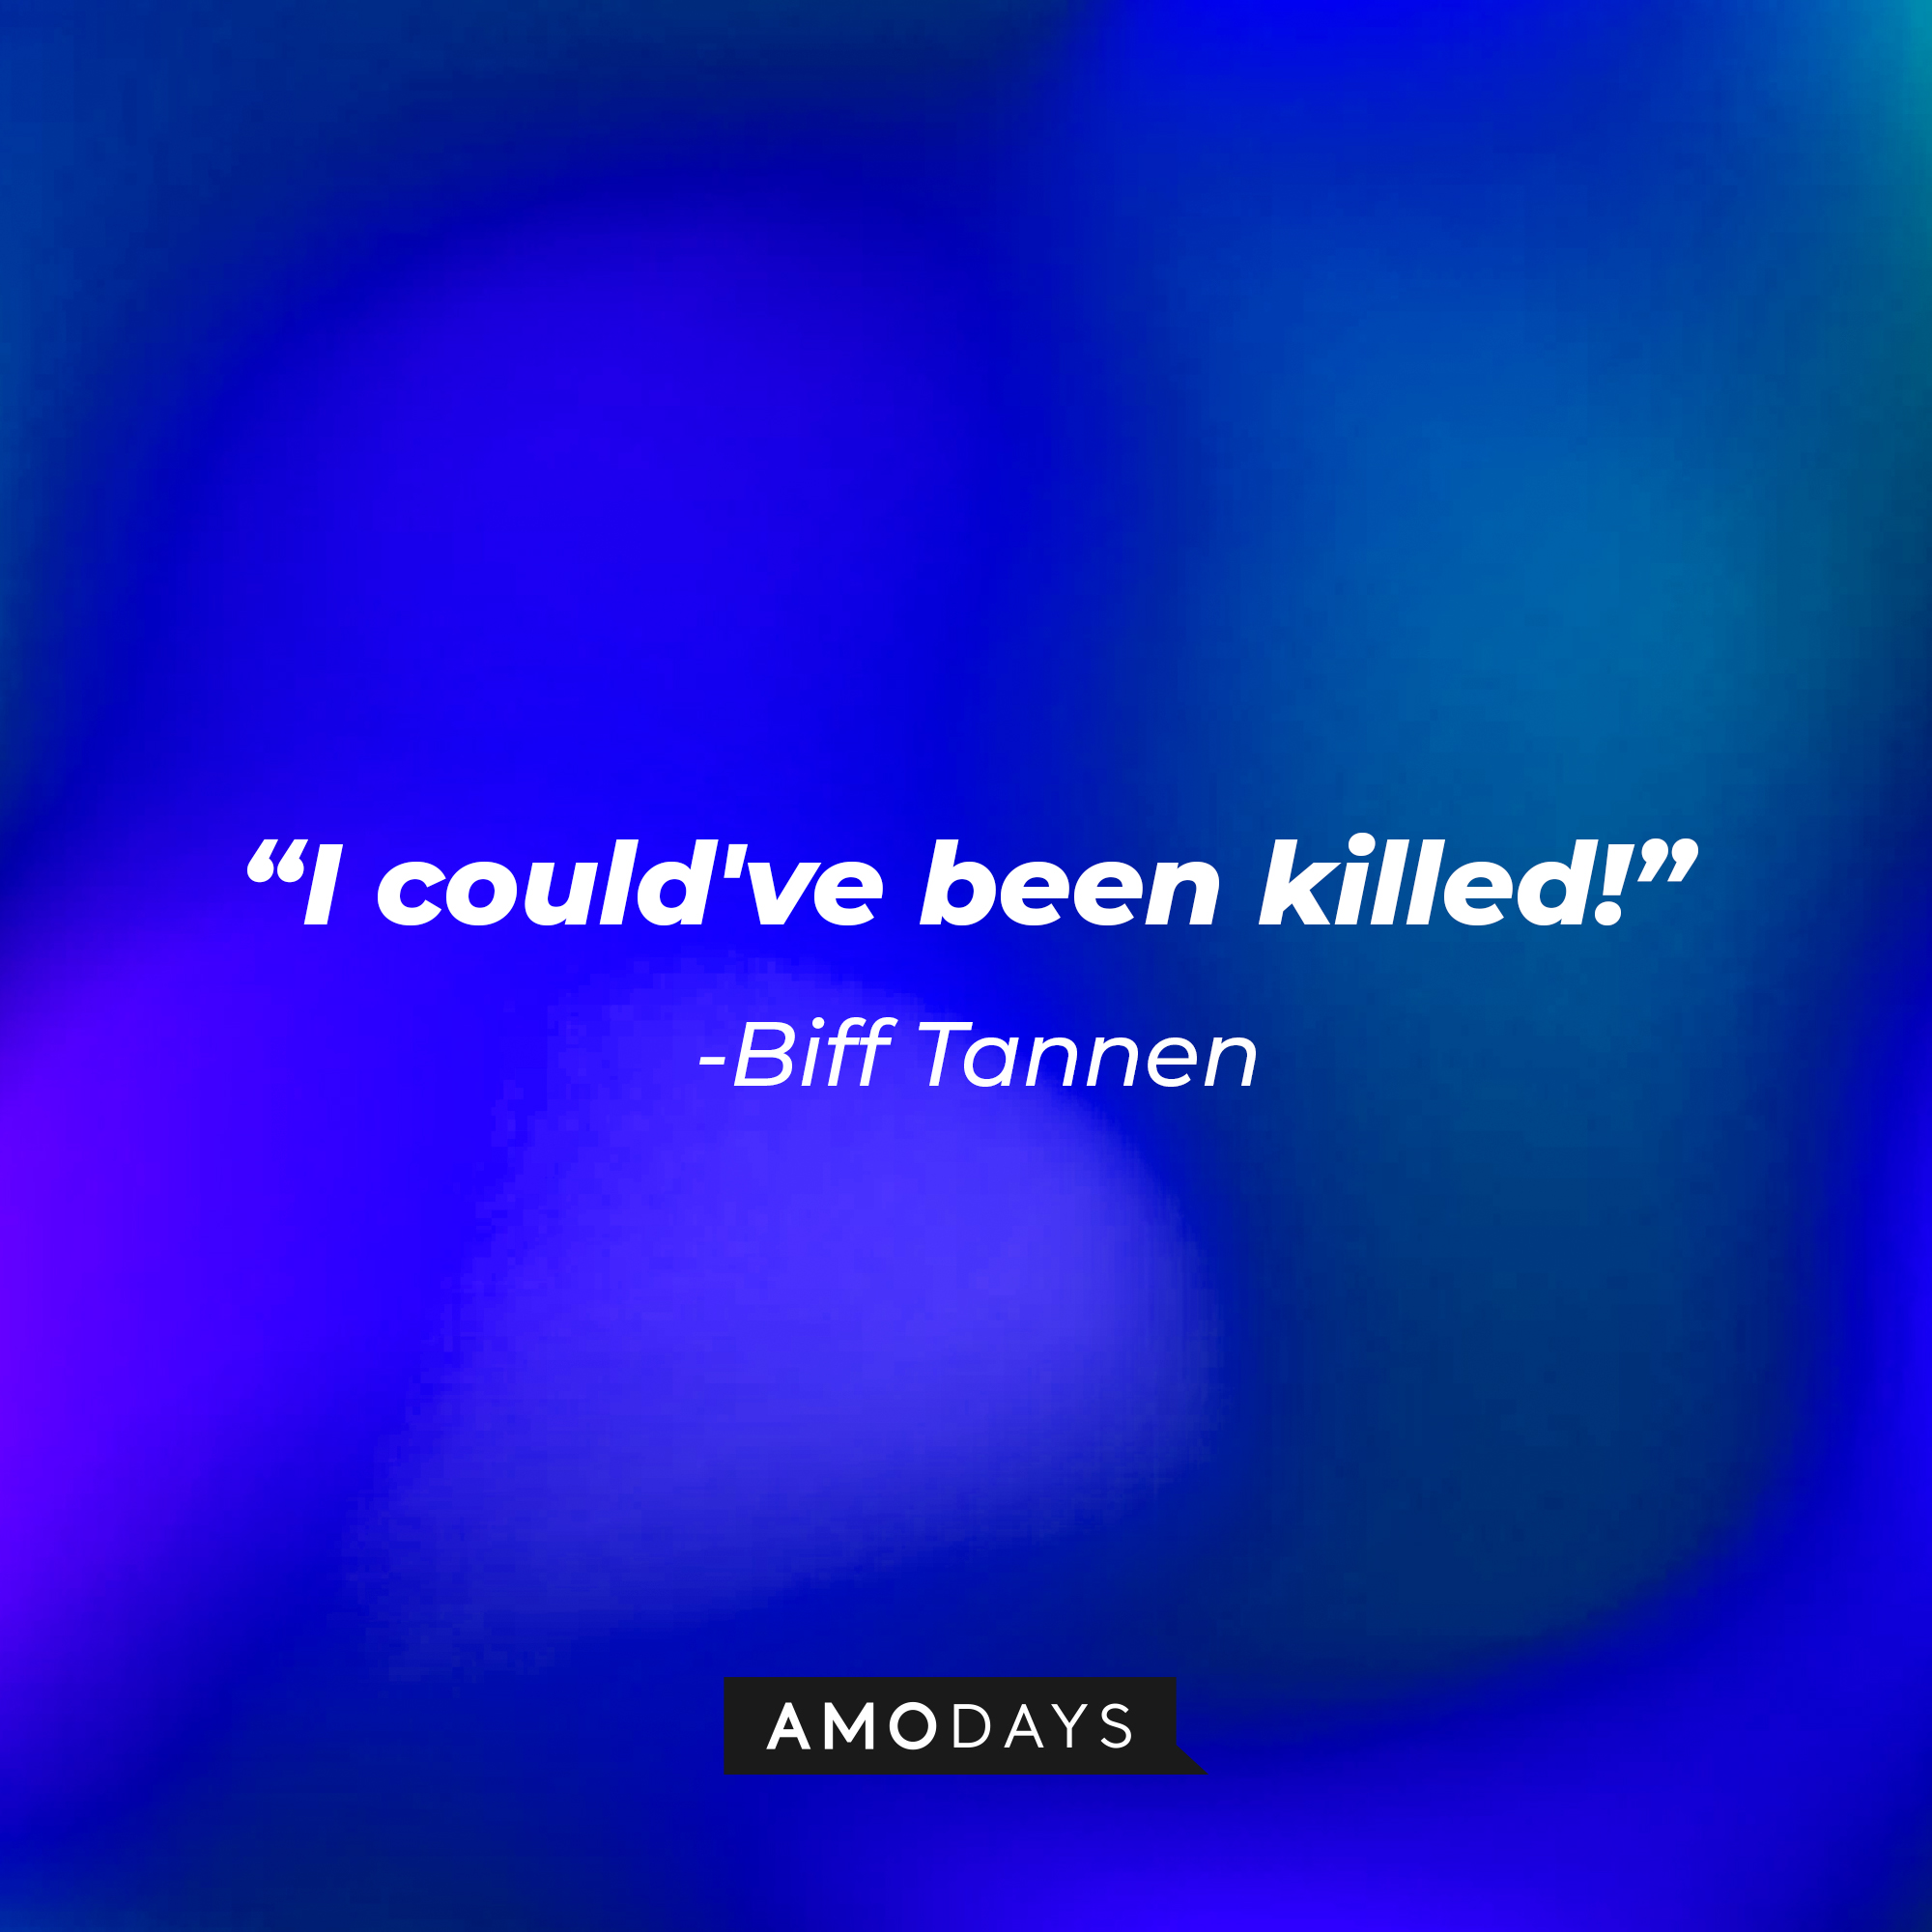 Biff Tannen’s quote: “I could've been killed!” | Source: AmoDays